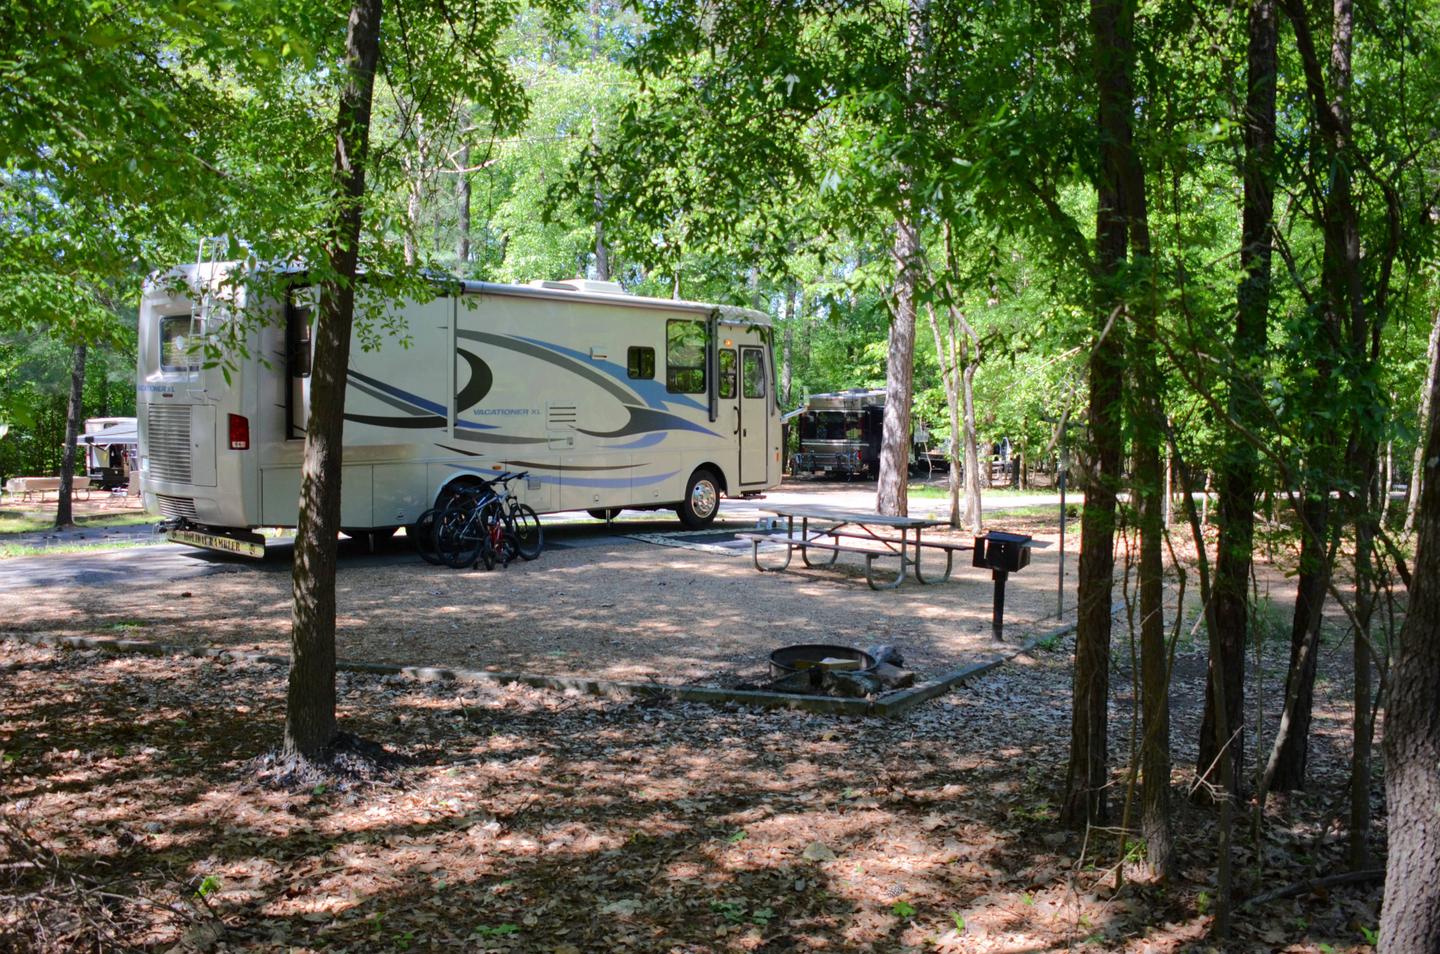 Campsite view, amenities, awning-side clearance.McKinney Campground, campsite 74.